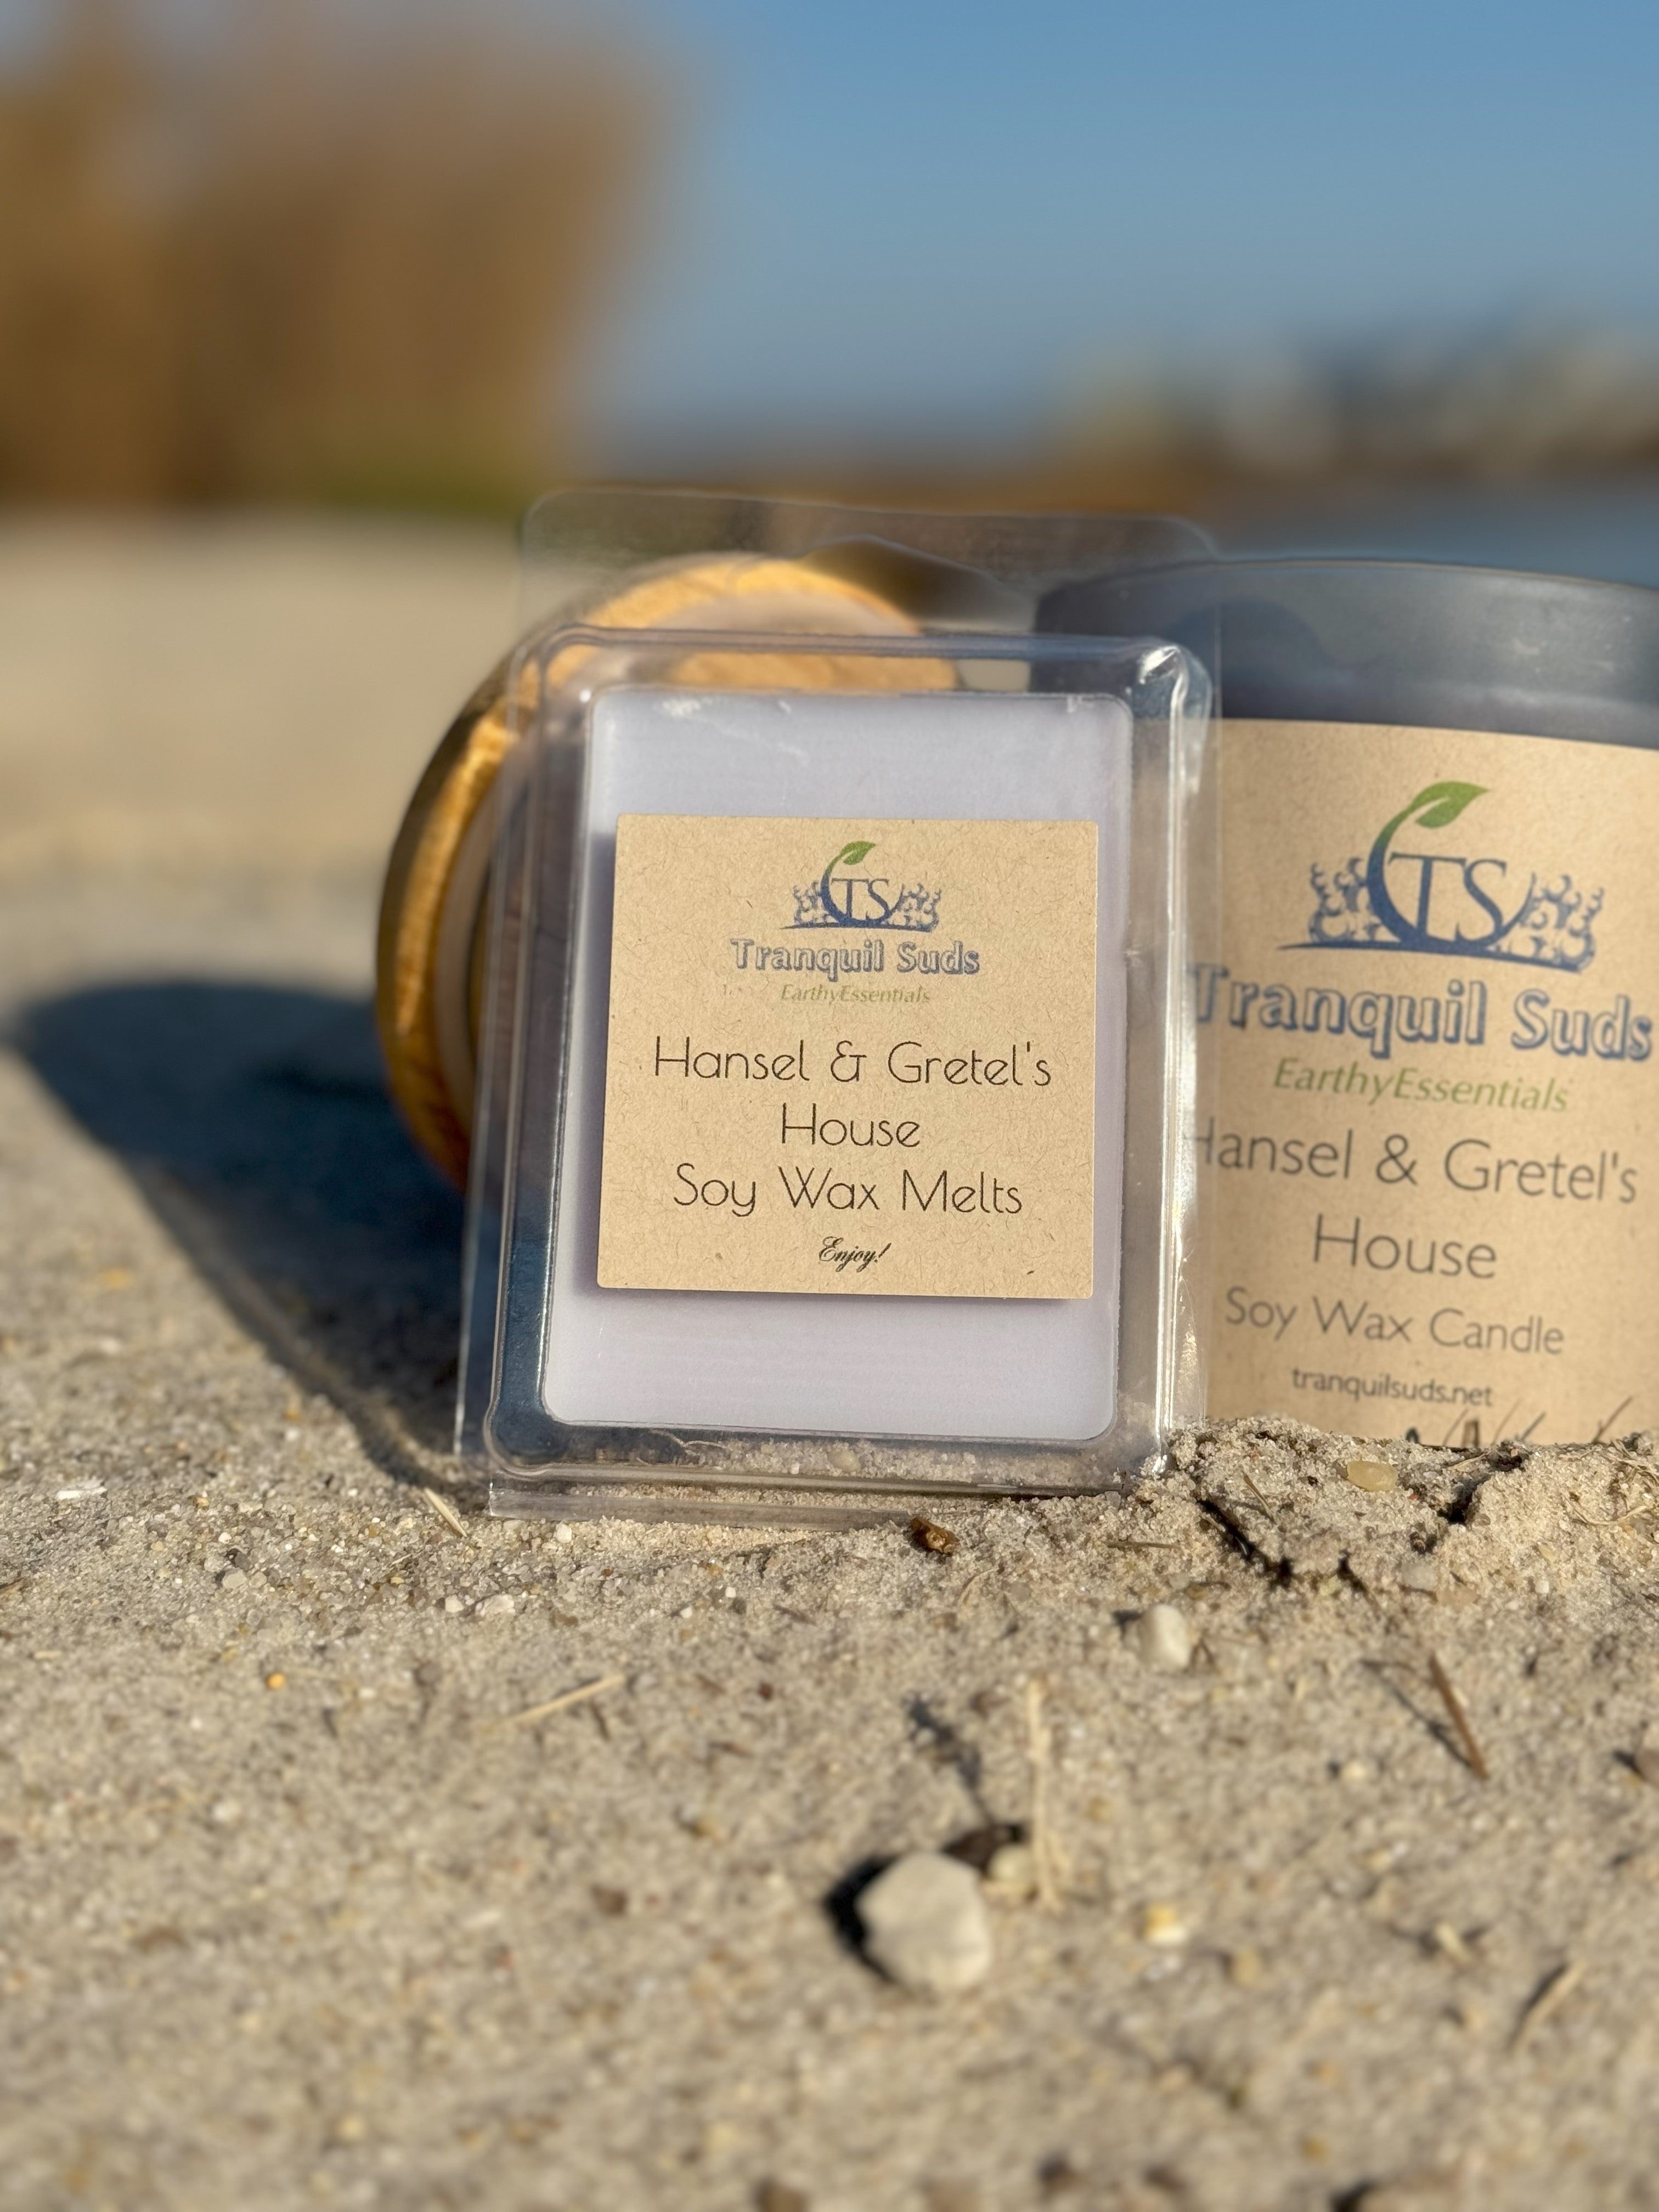 Hansel and Gretel's House Soy Wax Melts